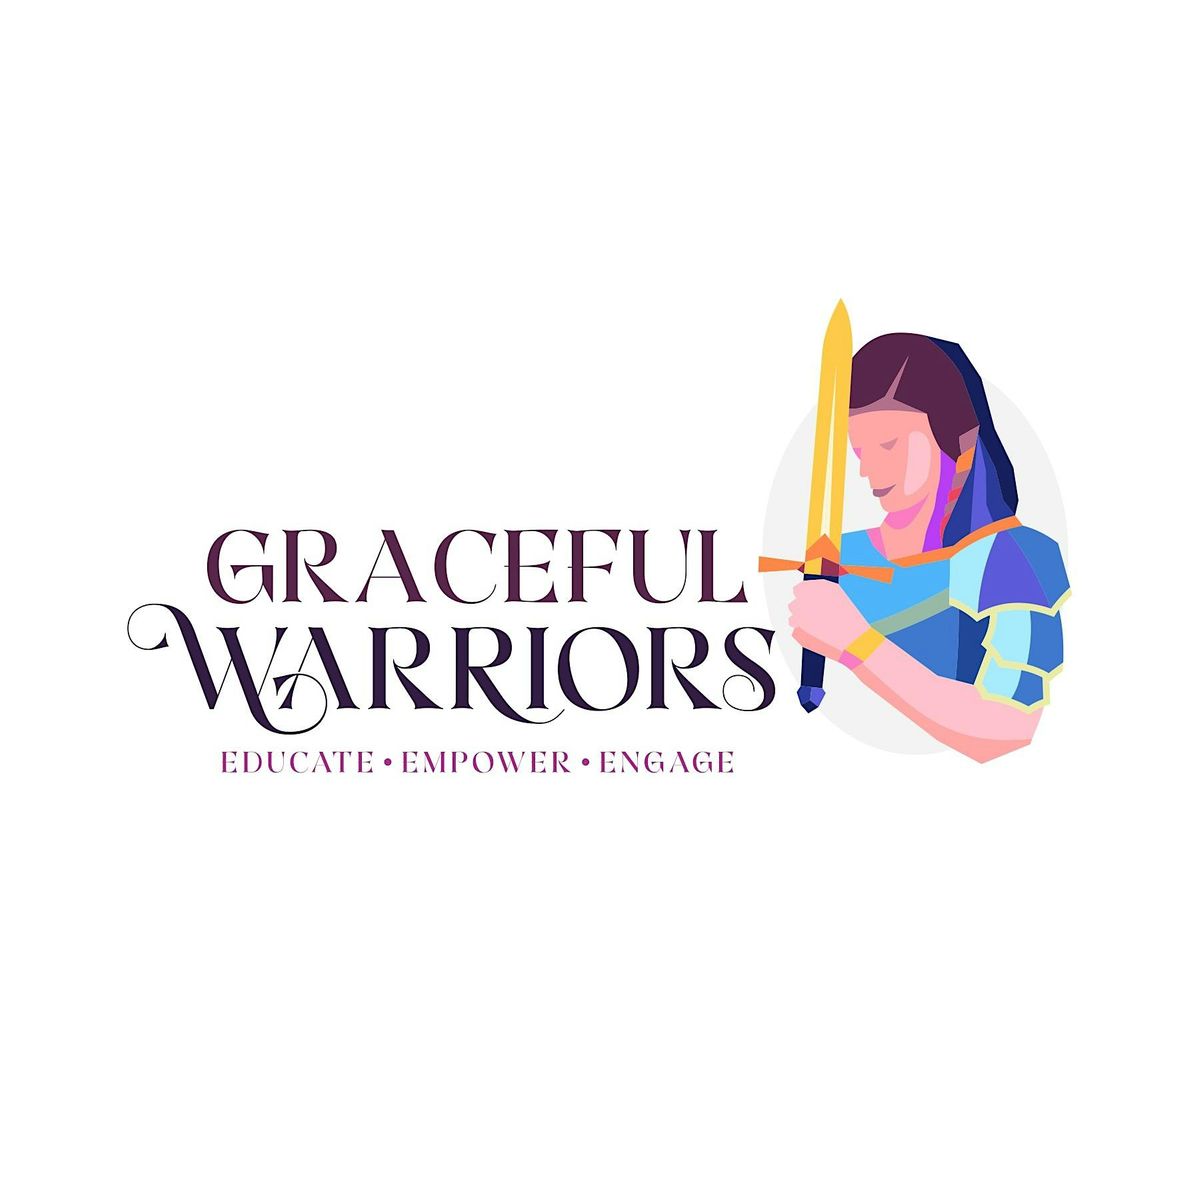 Graceful Warriors Women's Bible Study. Empowering women to be Victorious